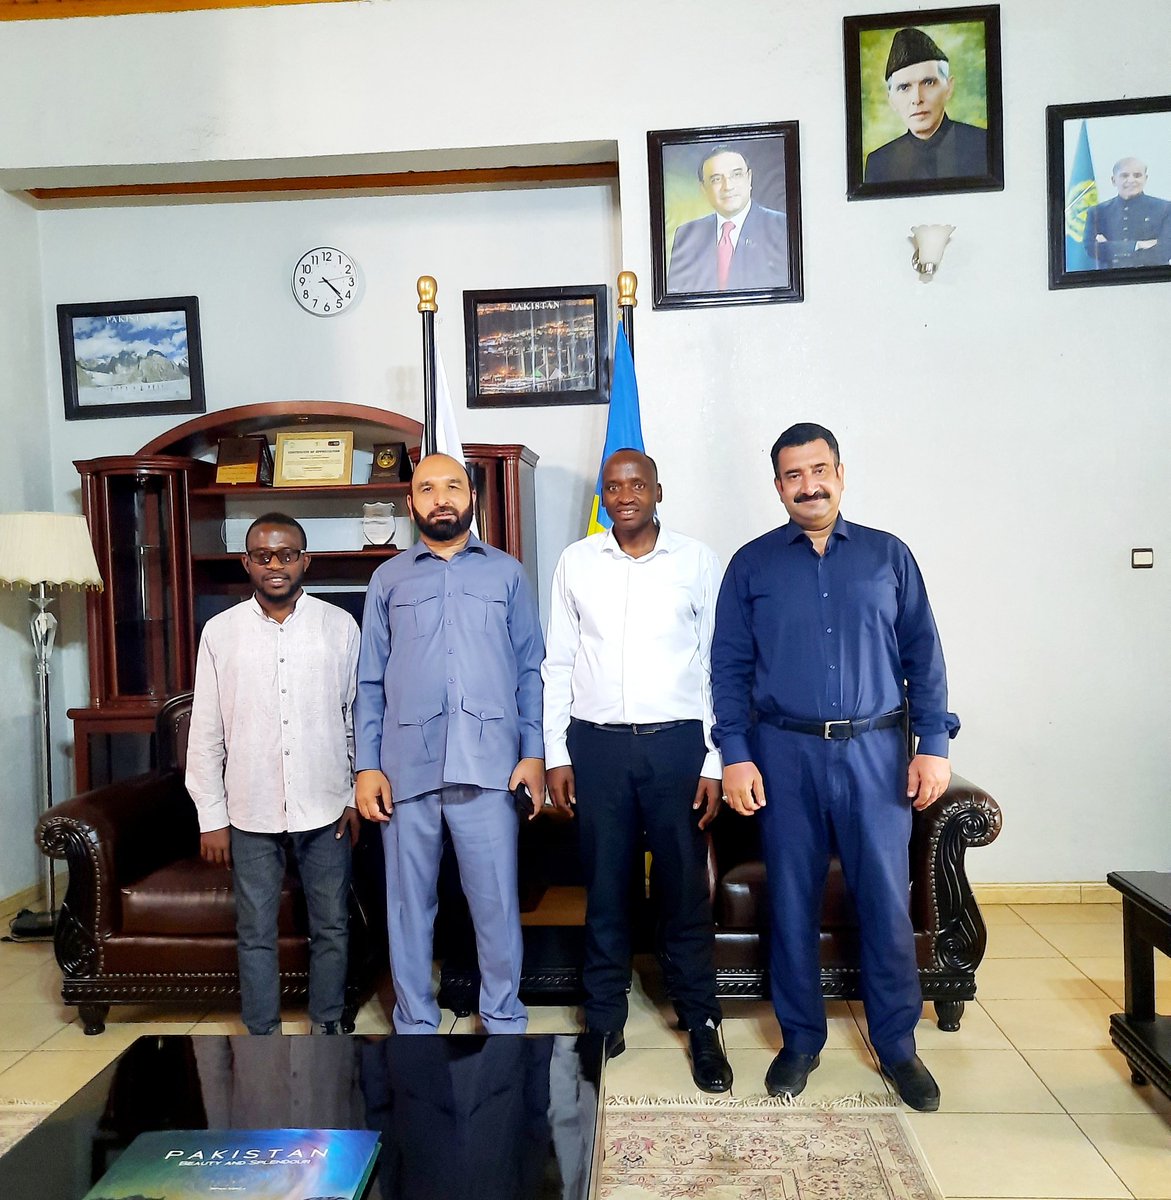 This afternoon, Together with CEO of @SoberClub1 @DrMbonimana met H.E. Naeem Khan, Ambassador of Pakistan in Rwanda @PakinRwanda. We discussed a partnership with @Yesi_Rwanda for helping youth to make informed decisions & preparing their bright futures. #YDSARProject